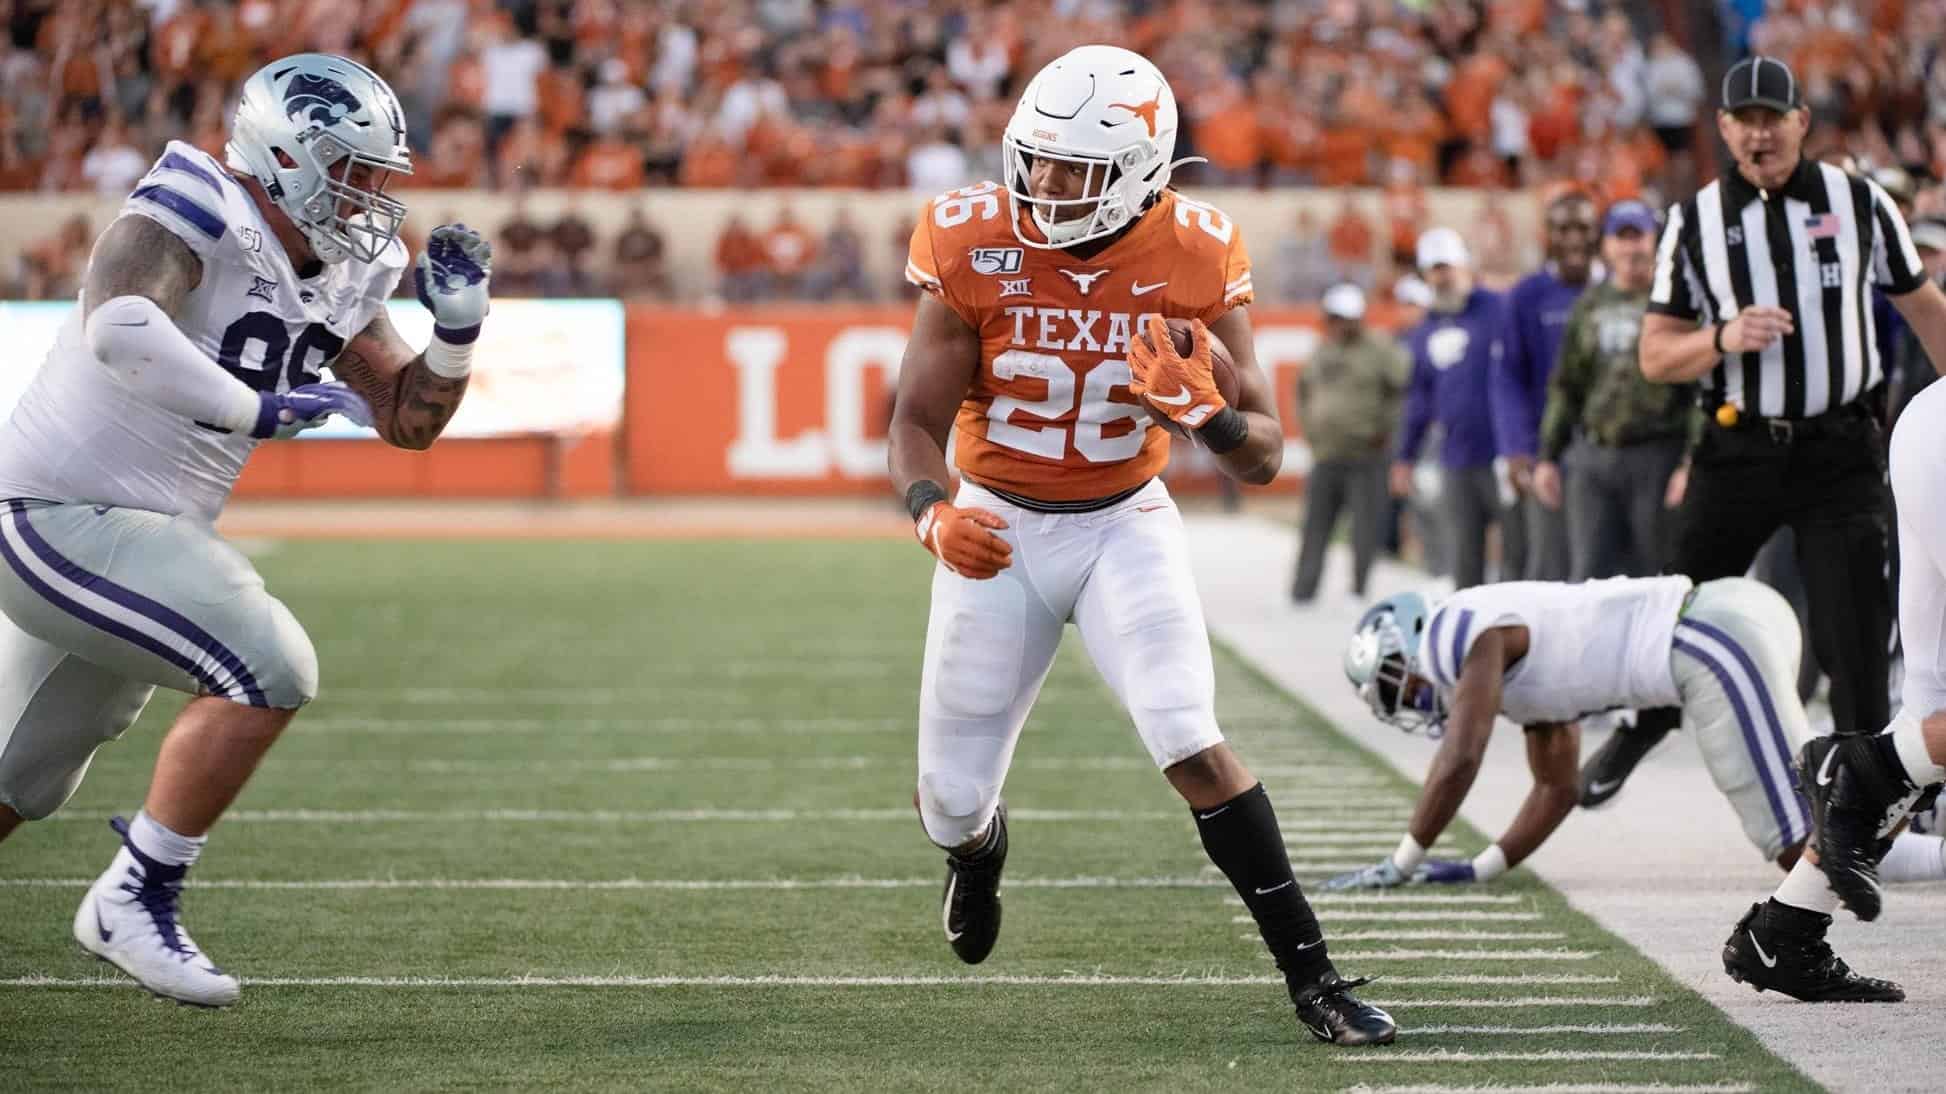 Texas RB Keaontay Ingram is underrated in the 2021 NFL Draft